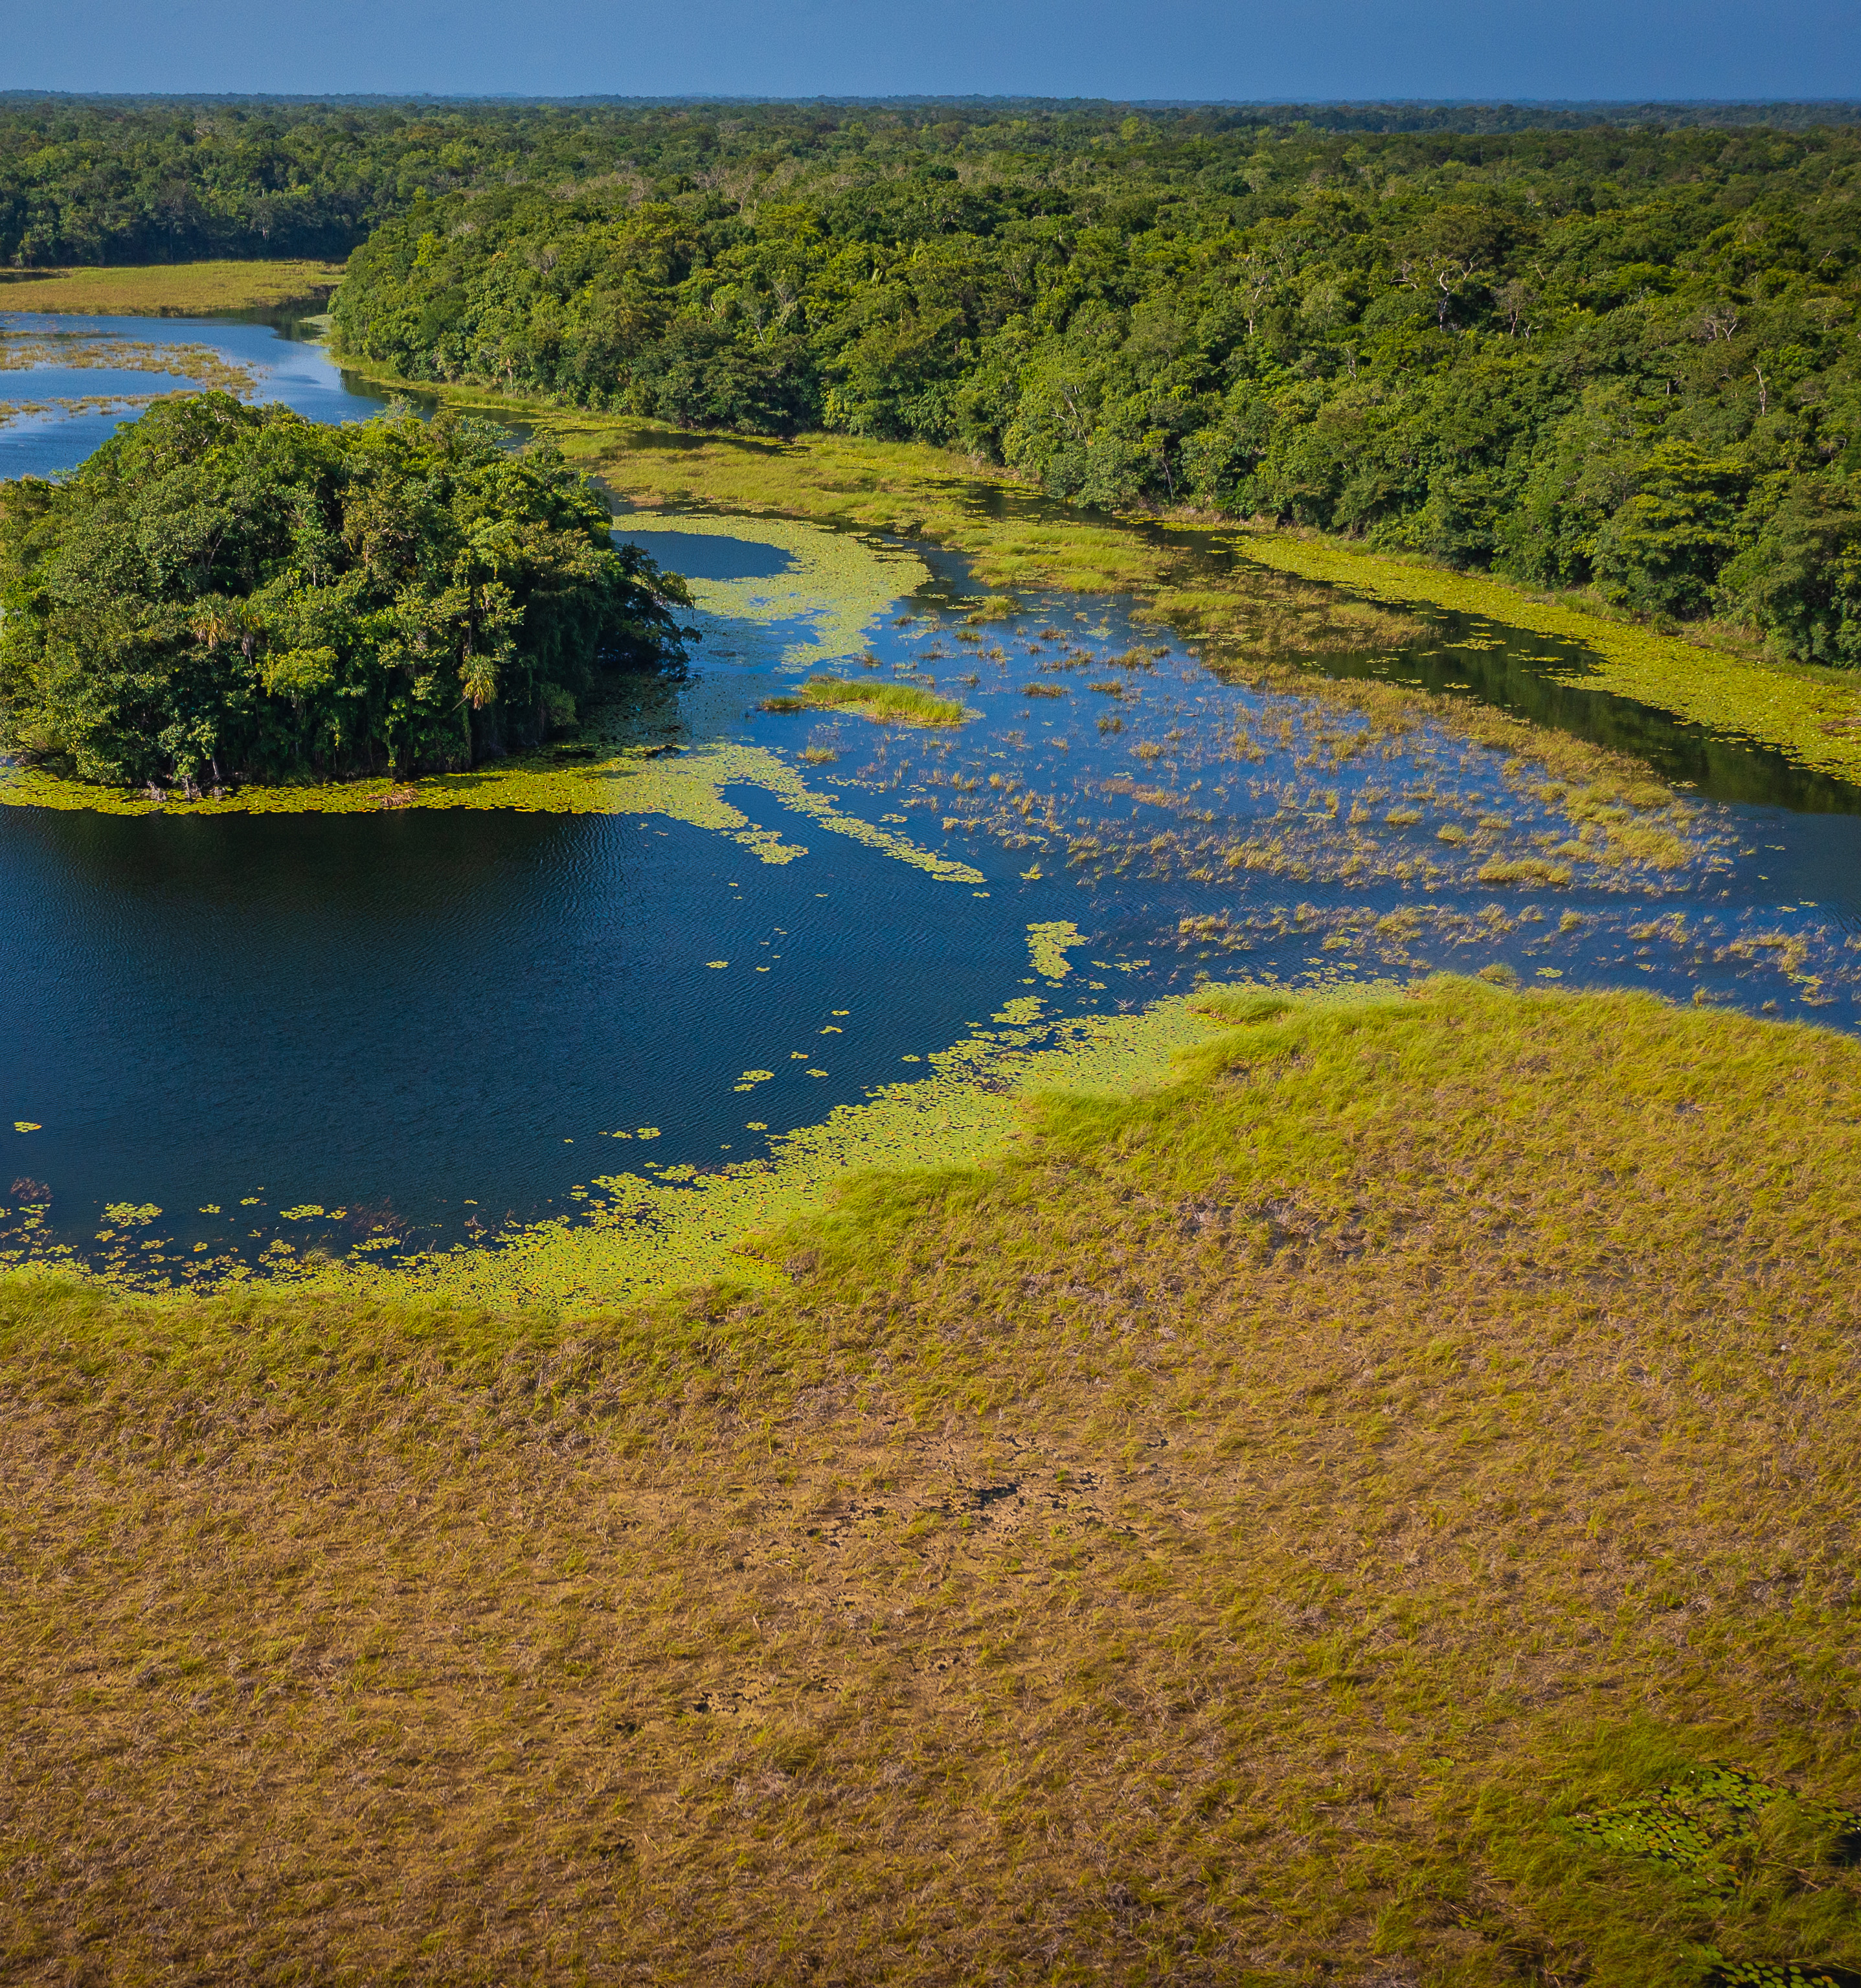 Bird's-eye view of a swampy lake surrounded by a forest